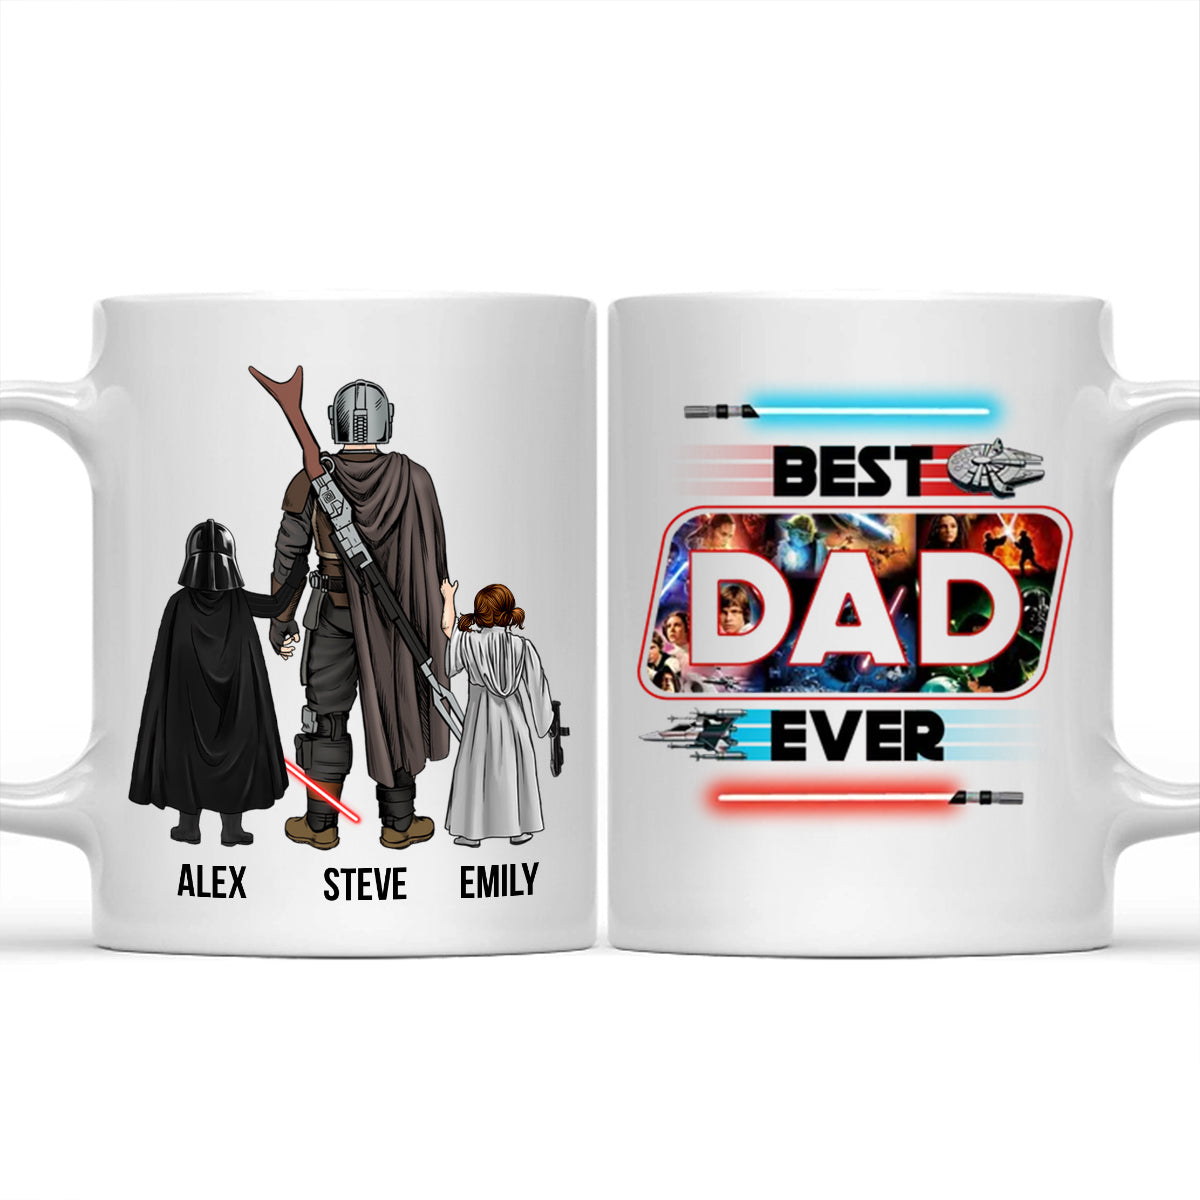 We Have The Best Dad Ever In The Galaxy - Gift For Father's Day - Personalized Mug